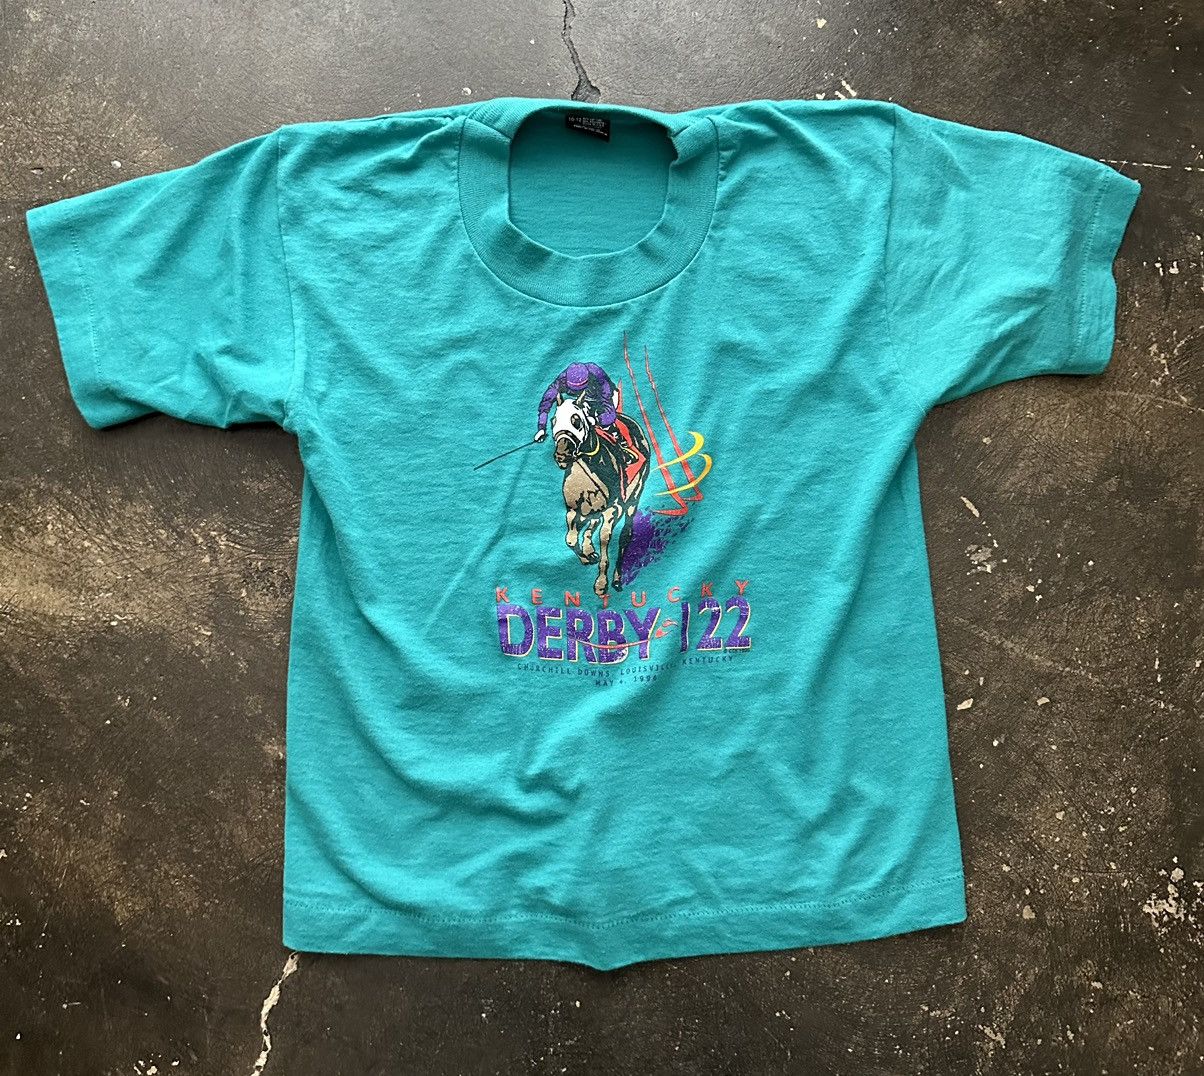 Vintage 1996 Kentucky Derby 122 FOTL Single Stitch Teal Tee Size XS / US 0-2 / IT 36-38 - 1 Preview